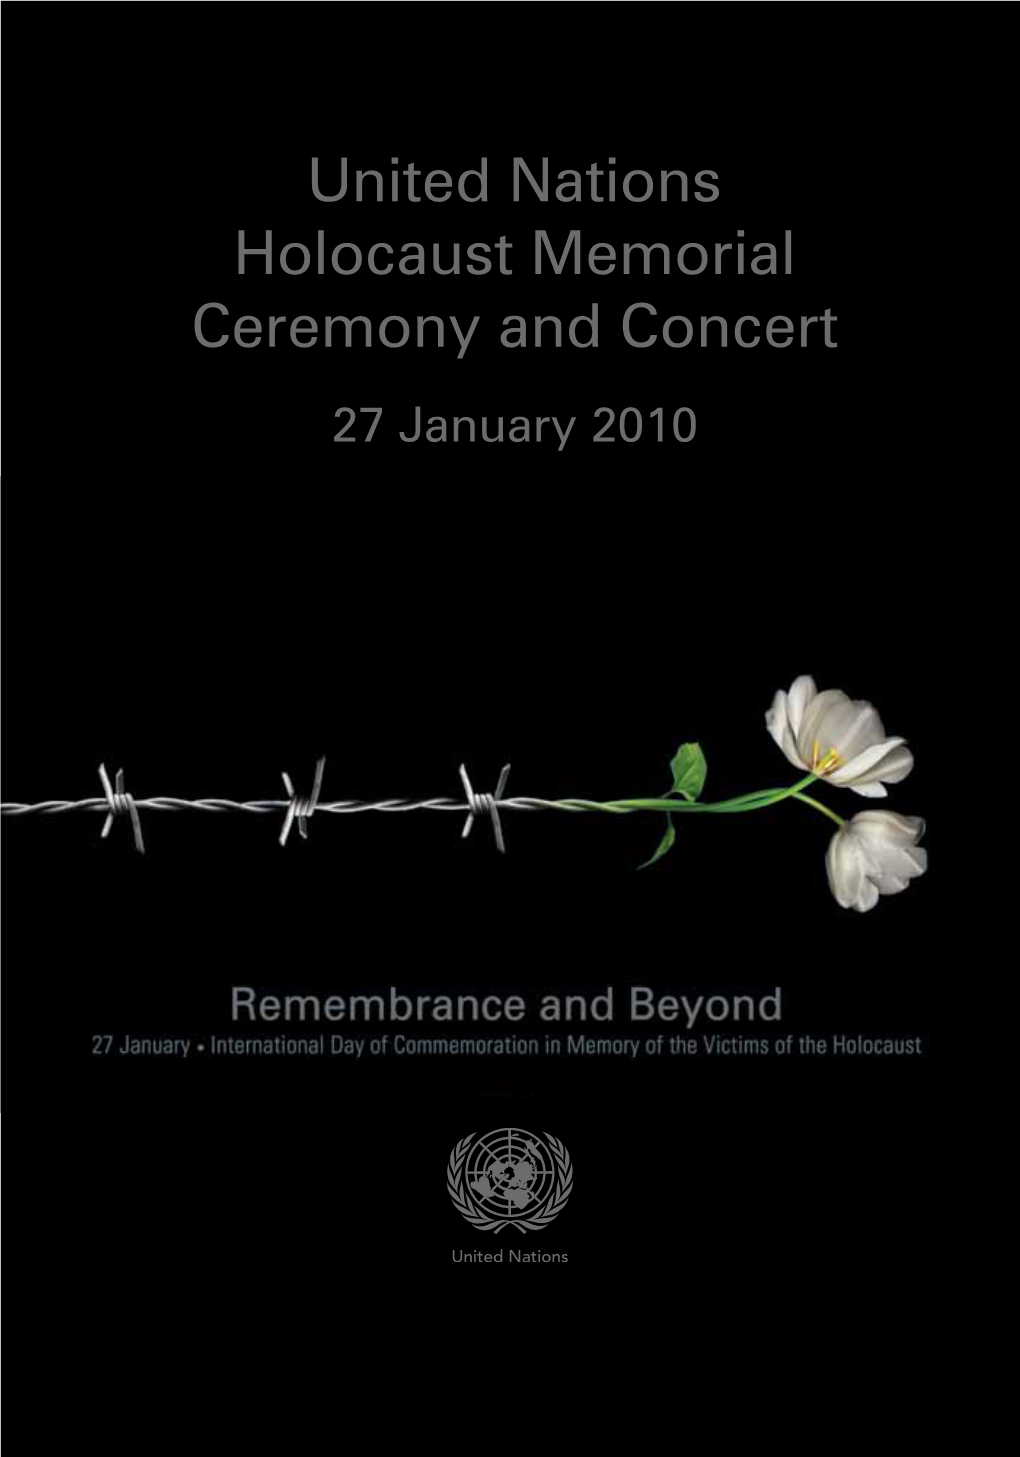 United Nations Holocaust Memorial Ceremony and Concert